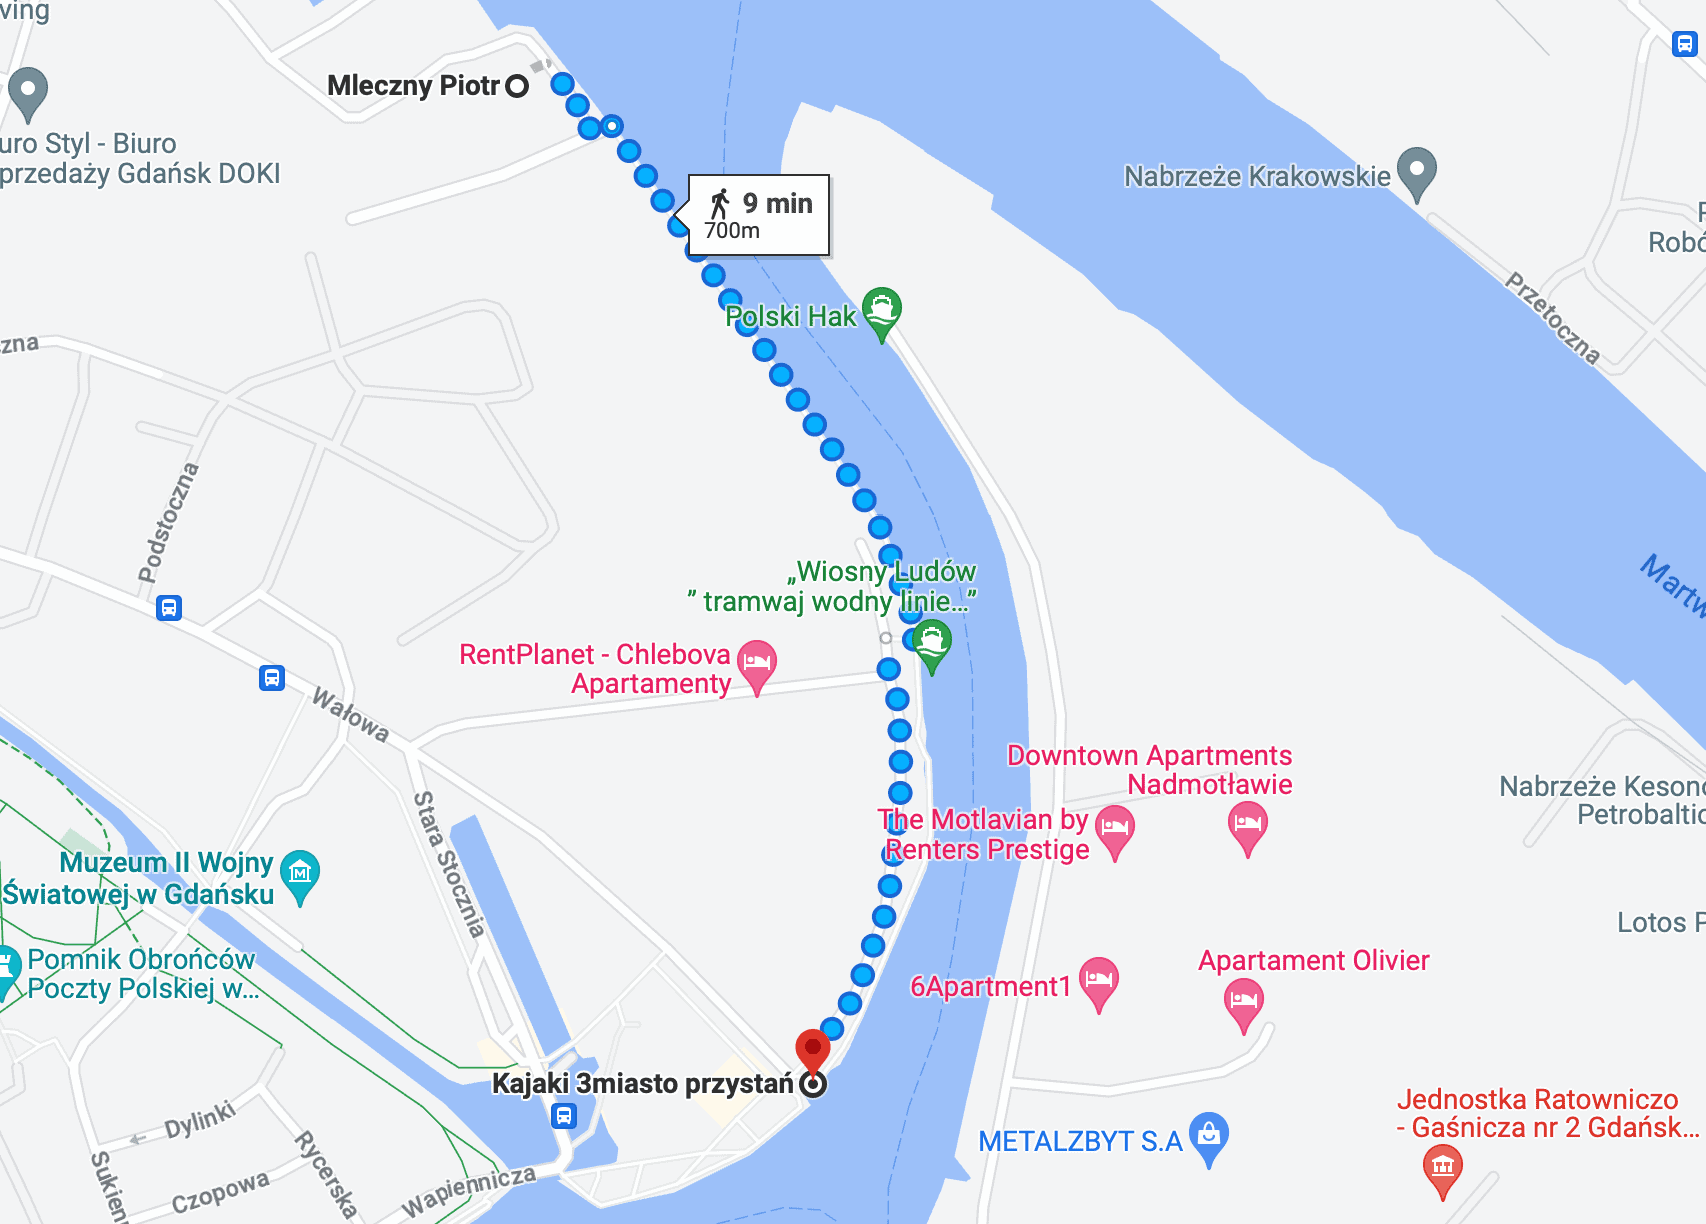 Walking route from Brabank to Mleczny Piotr art gallery in Gdańsk